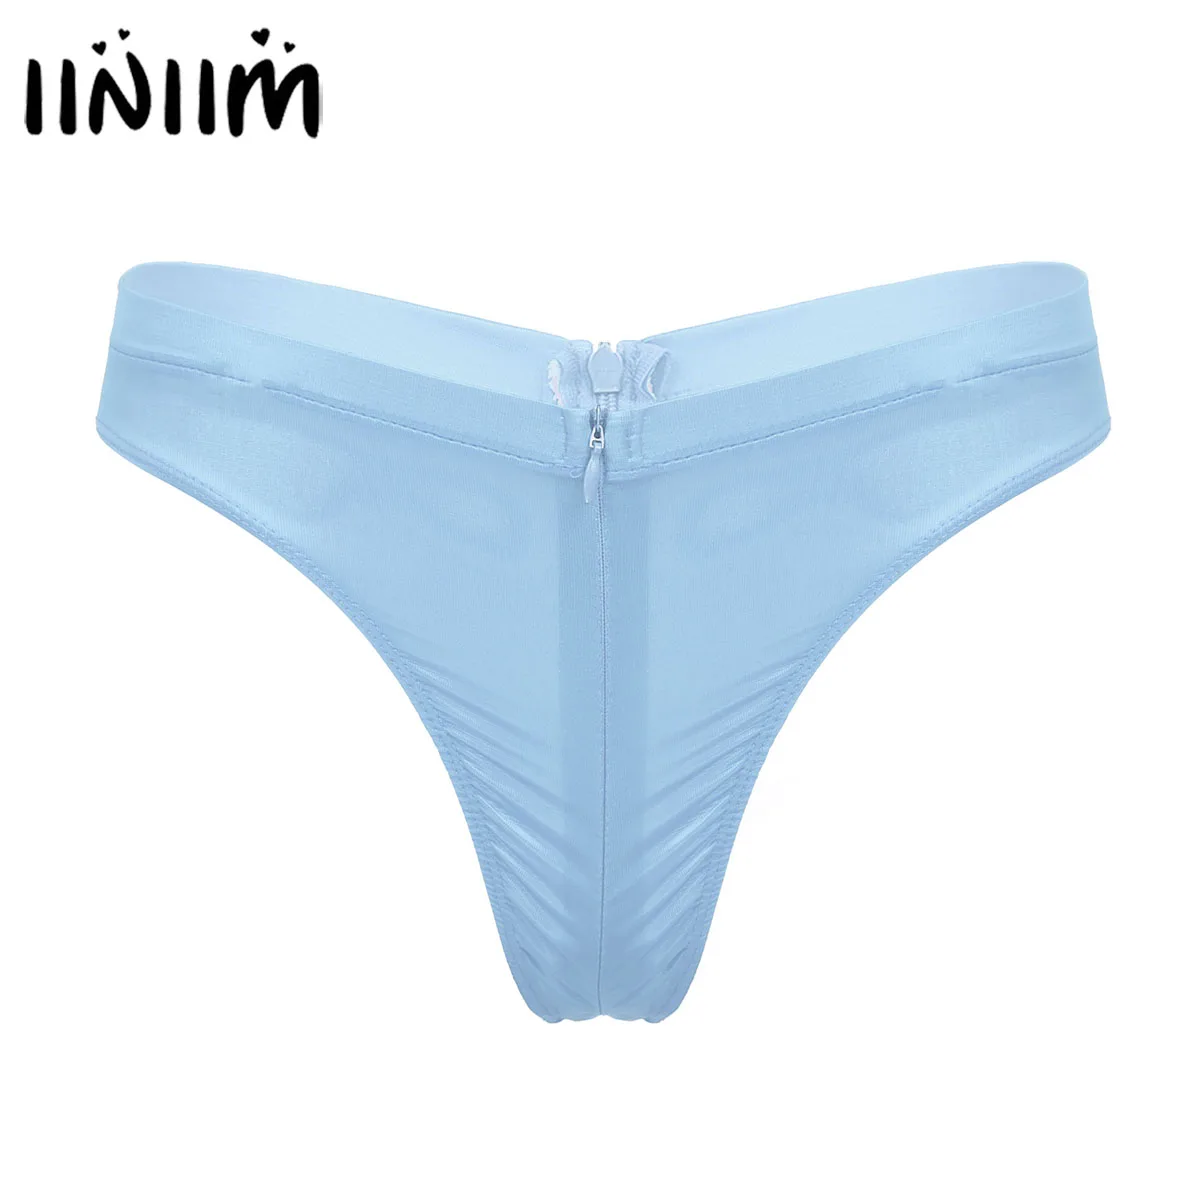 

New Womens Lingerie Panties See-Through Invisible Briefs Low Rise Elastic Waistband Zipper Crotchless Thong Underwear Underpants